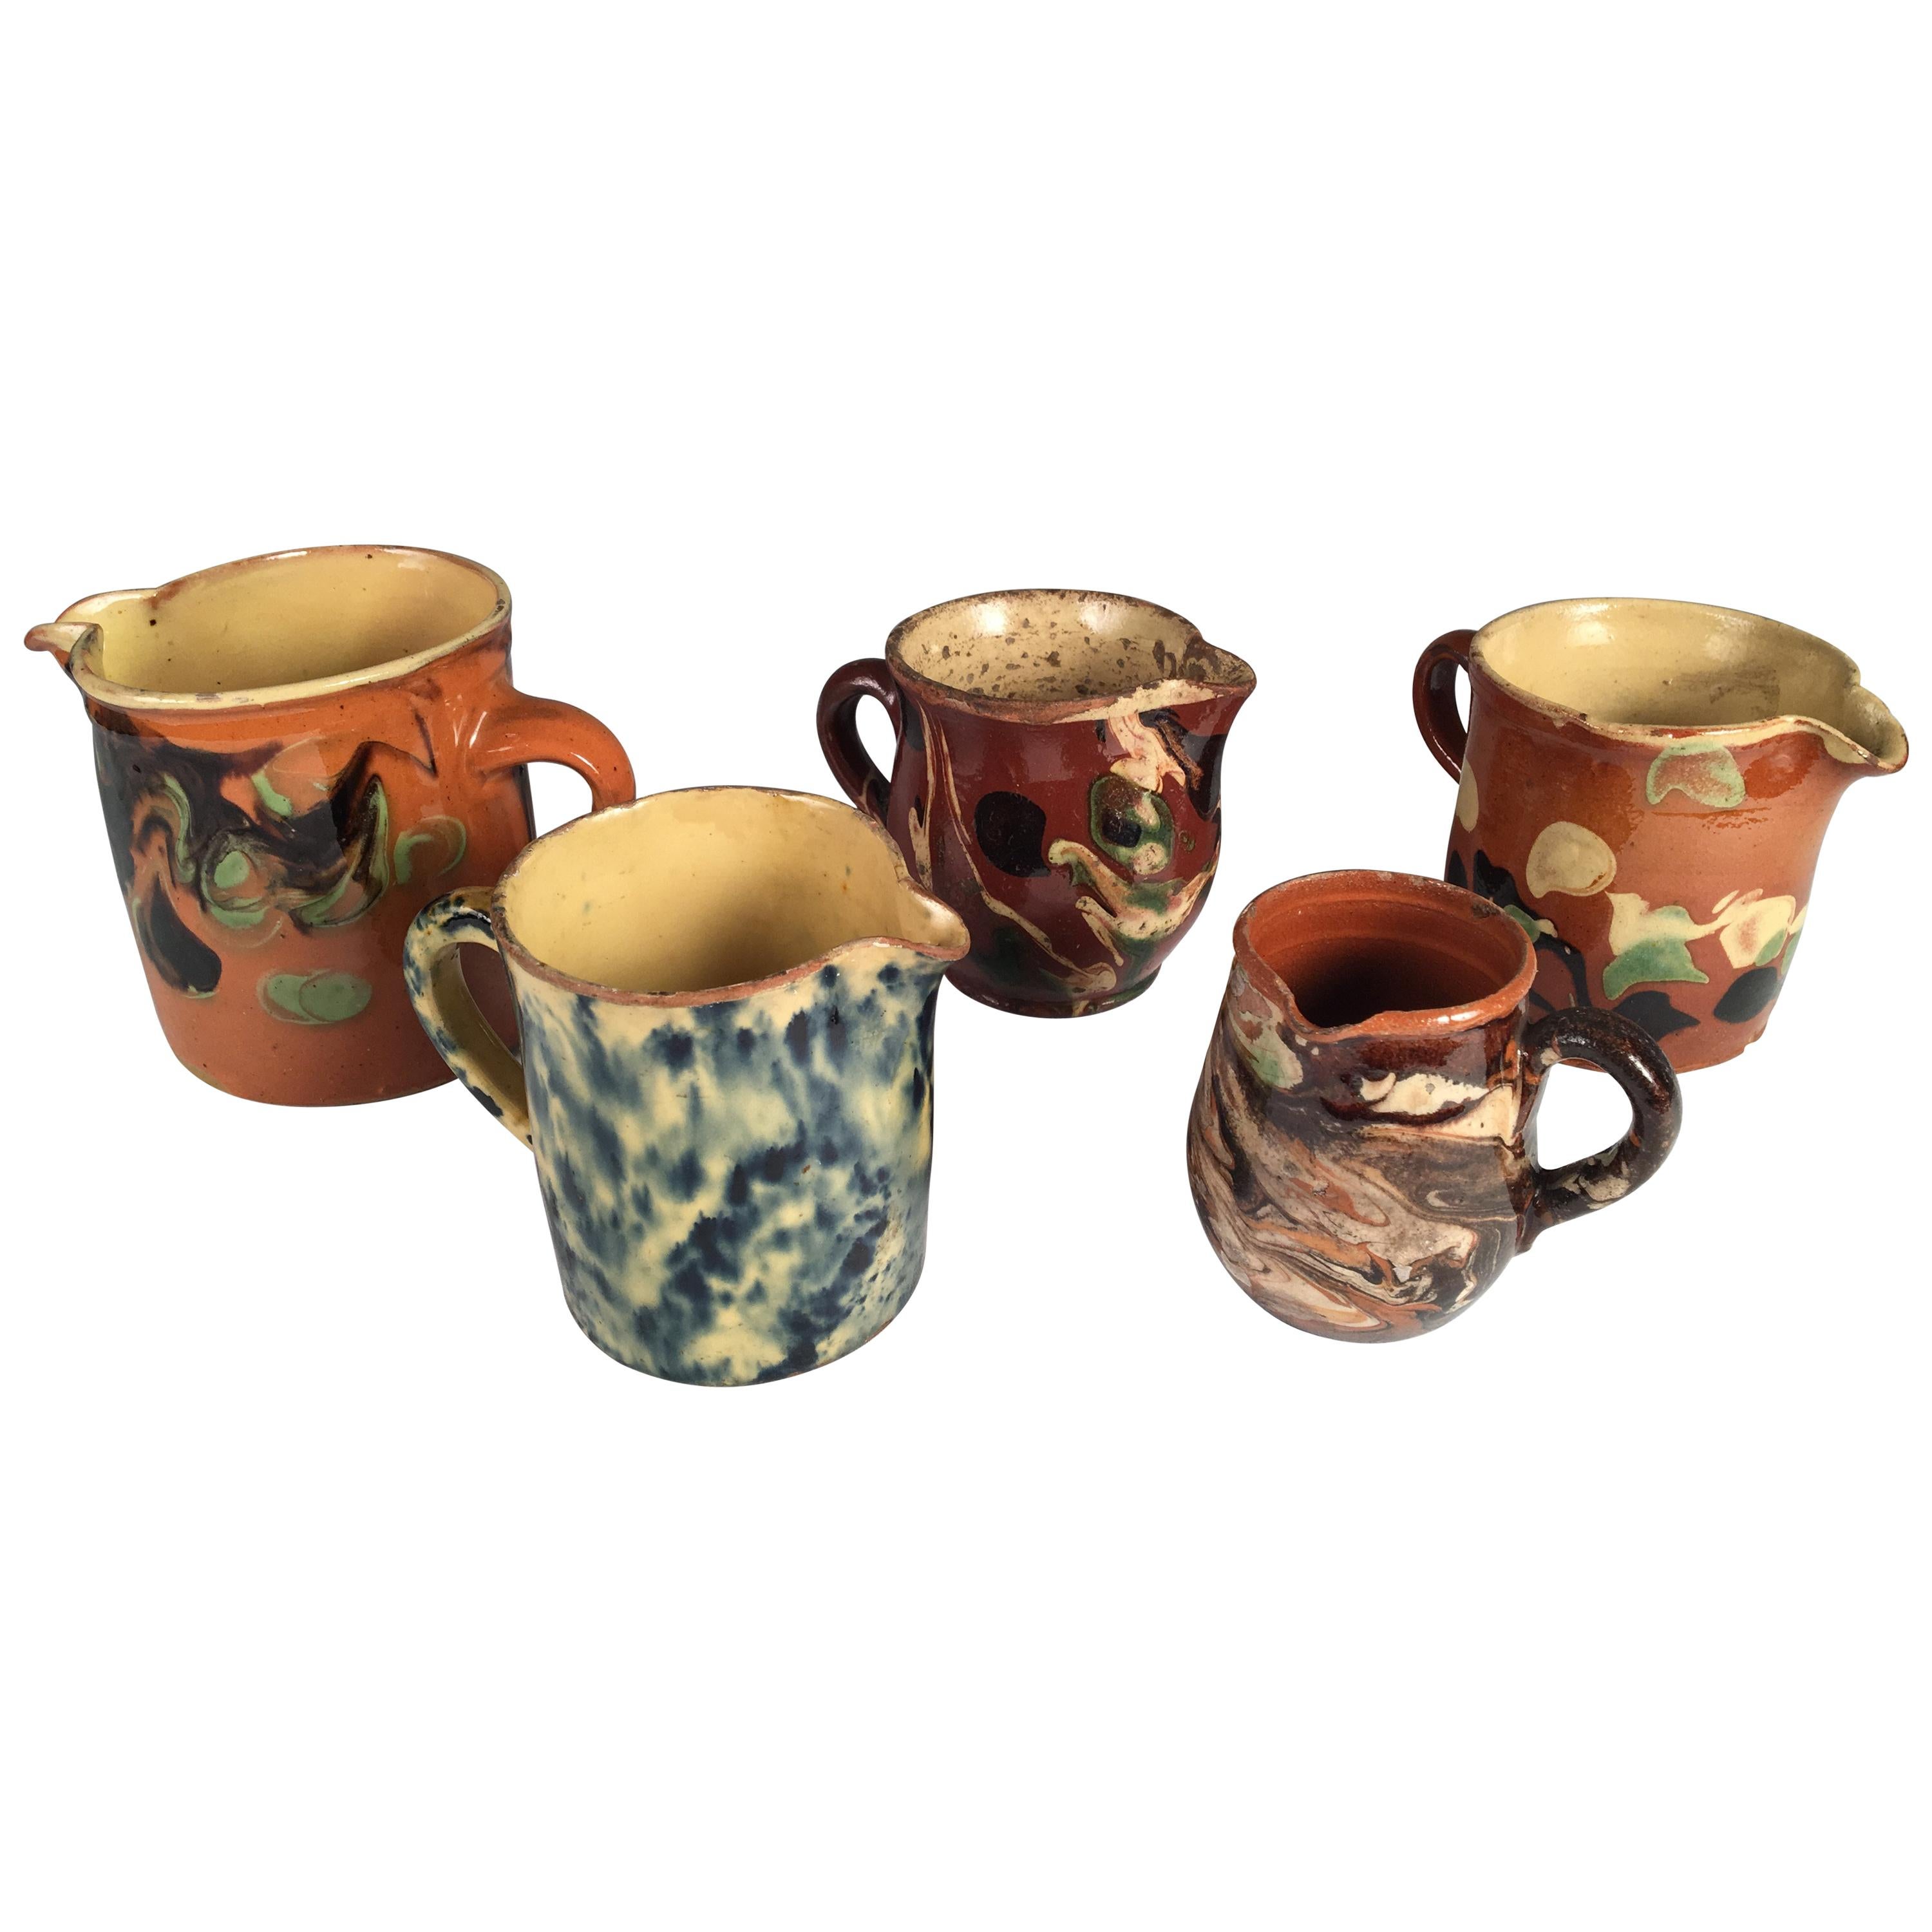 Collection of 5 Small Jaspe' Cups and Pitchers, French, 19th Century